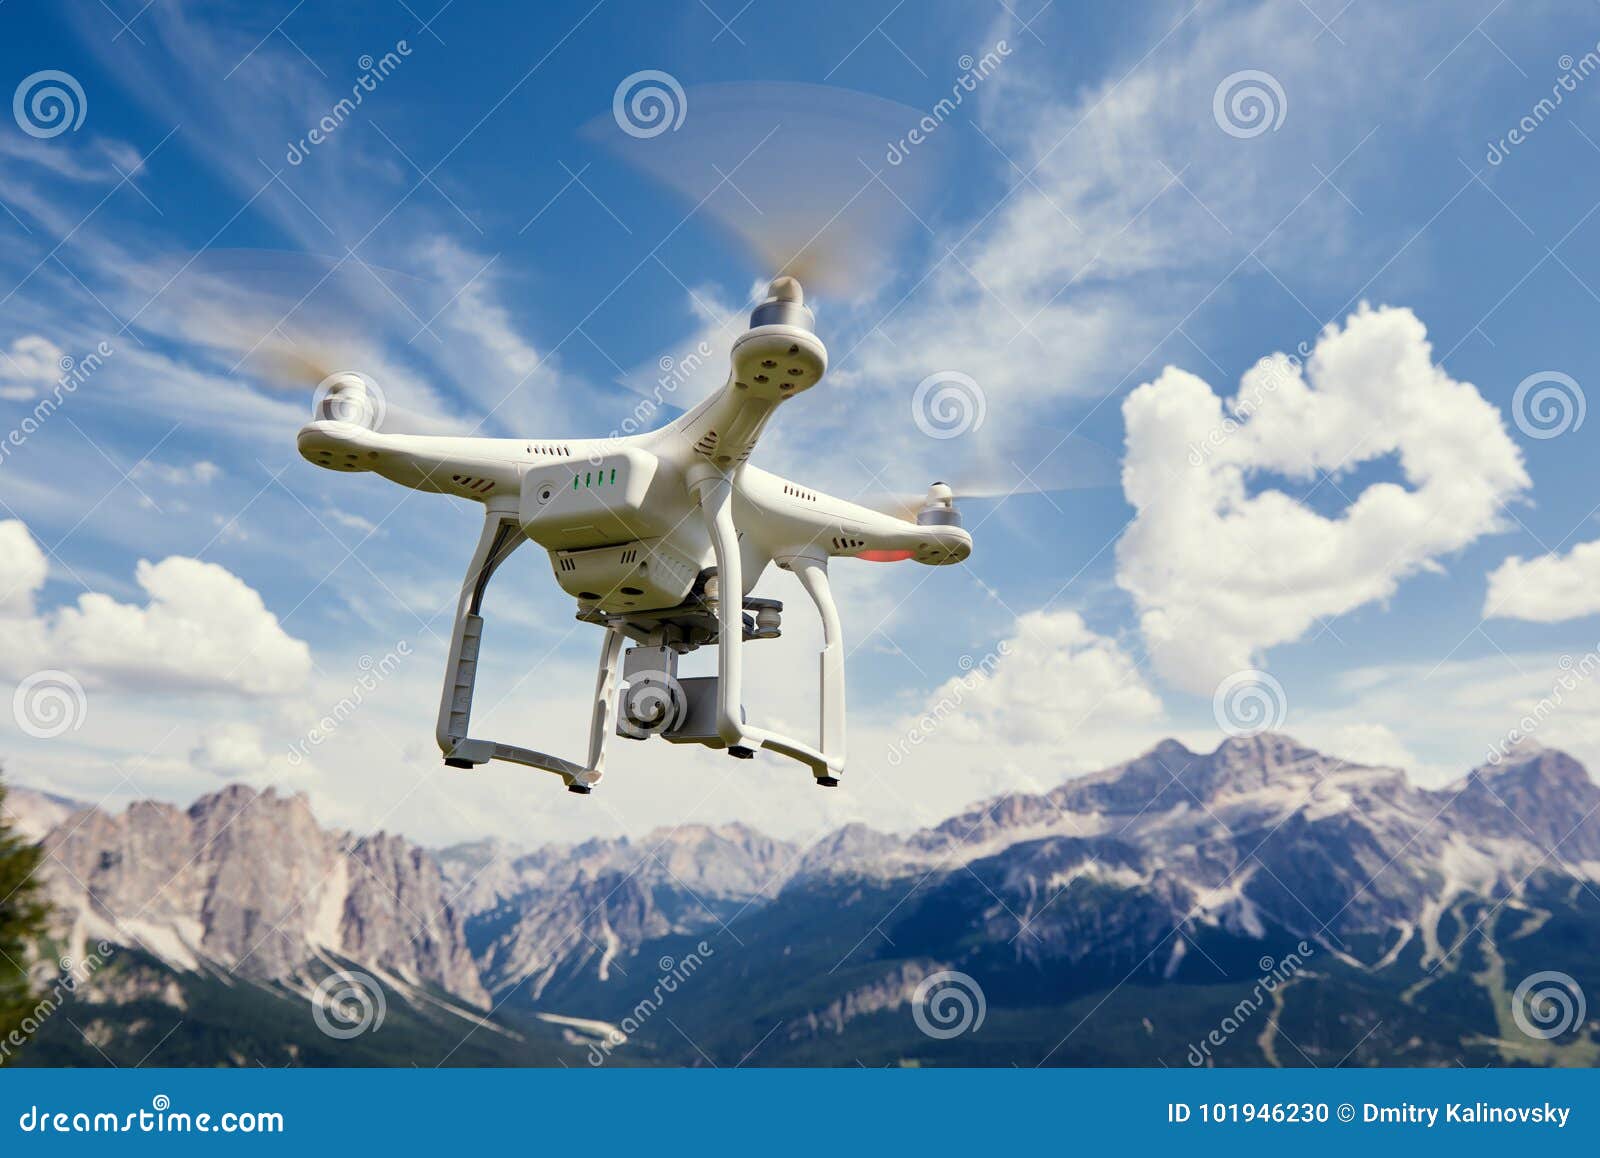 drone copter flying with camera in mountains